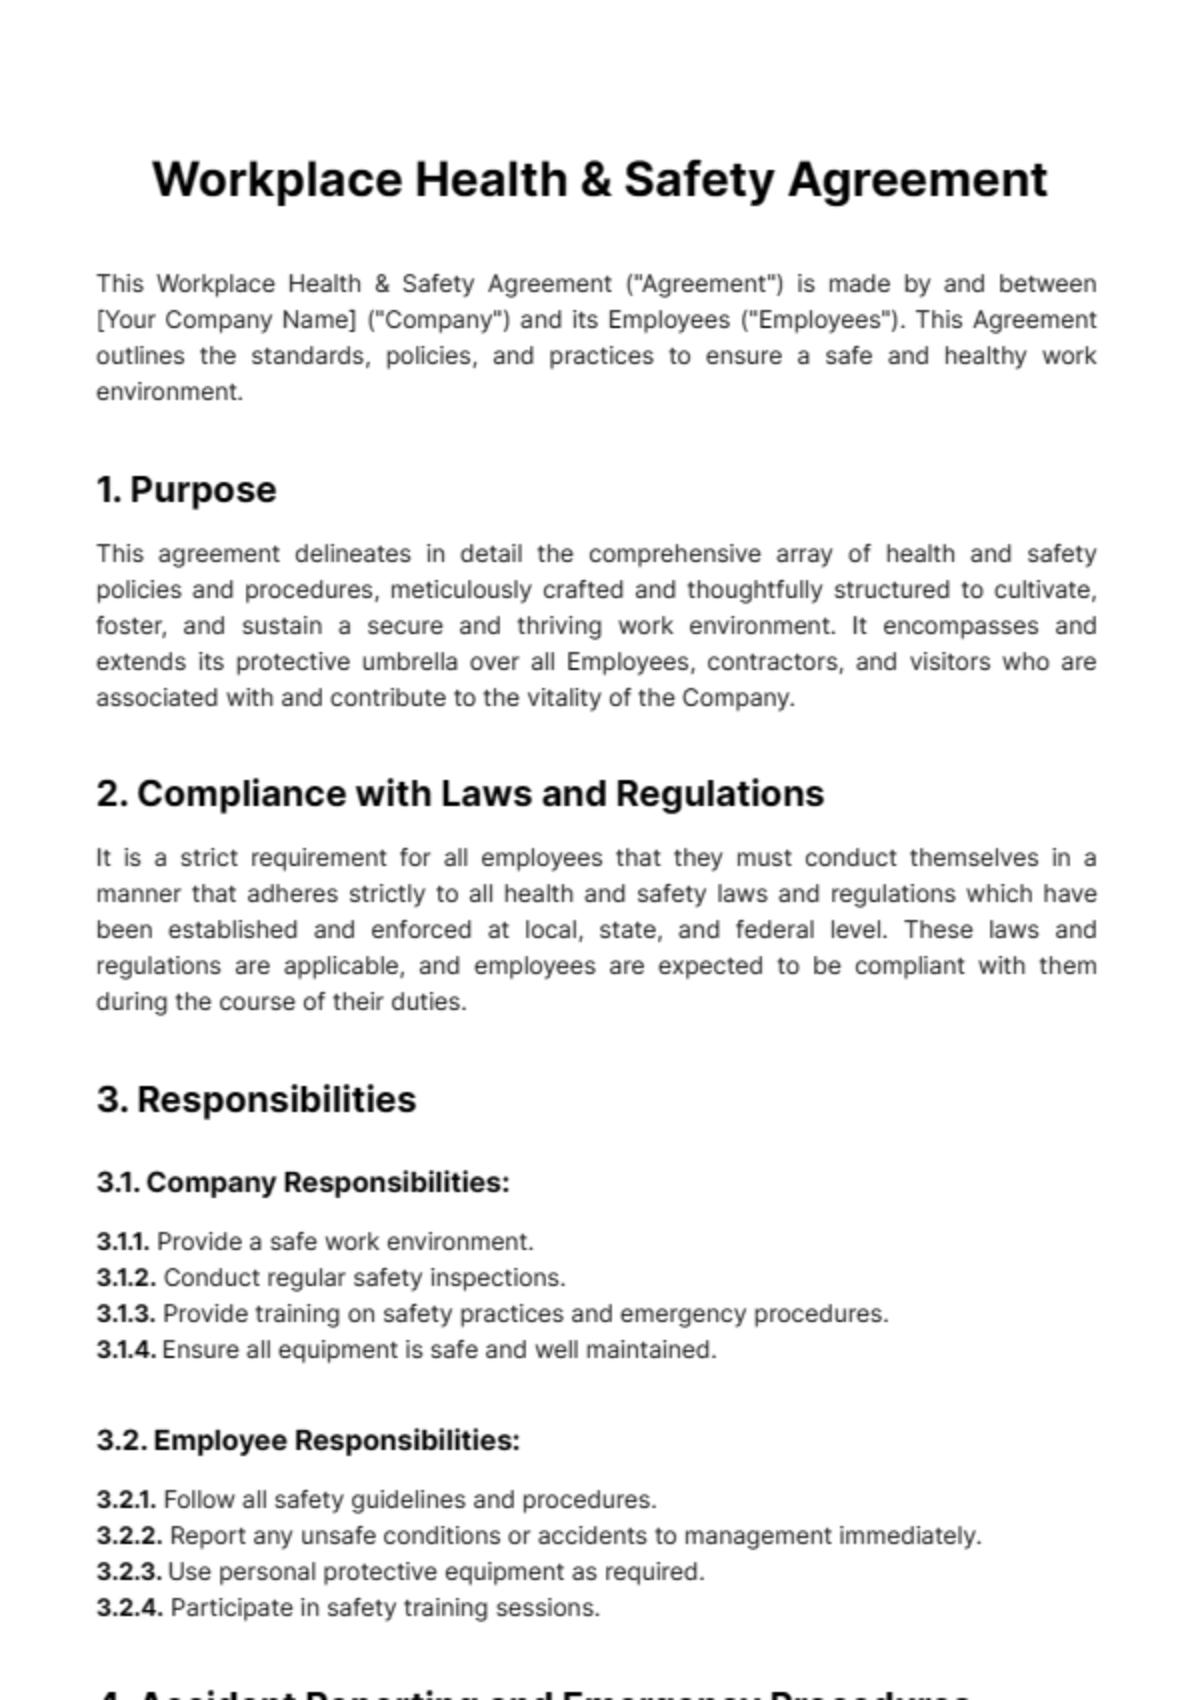 Workplace Health & Safety Agreement Template